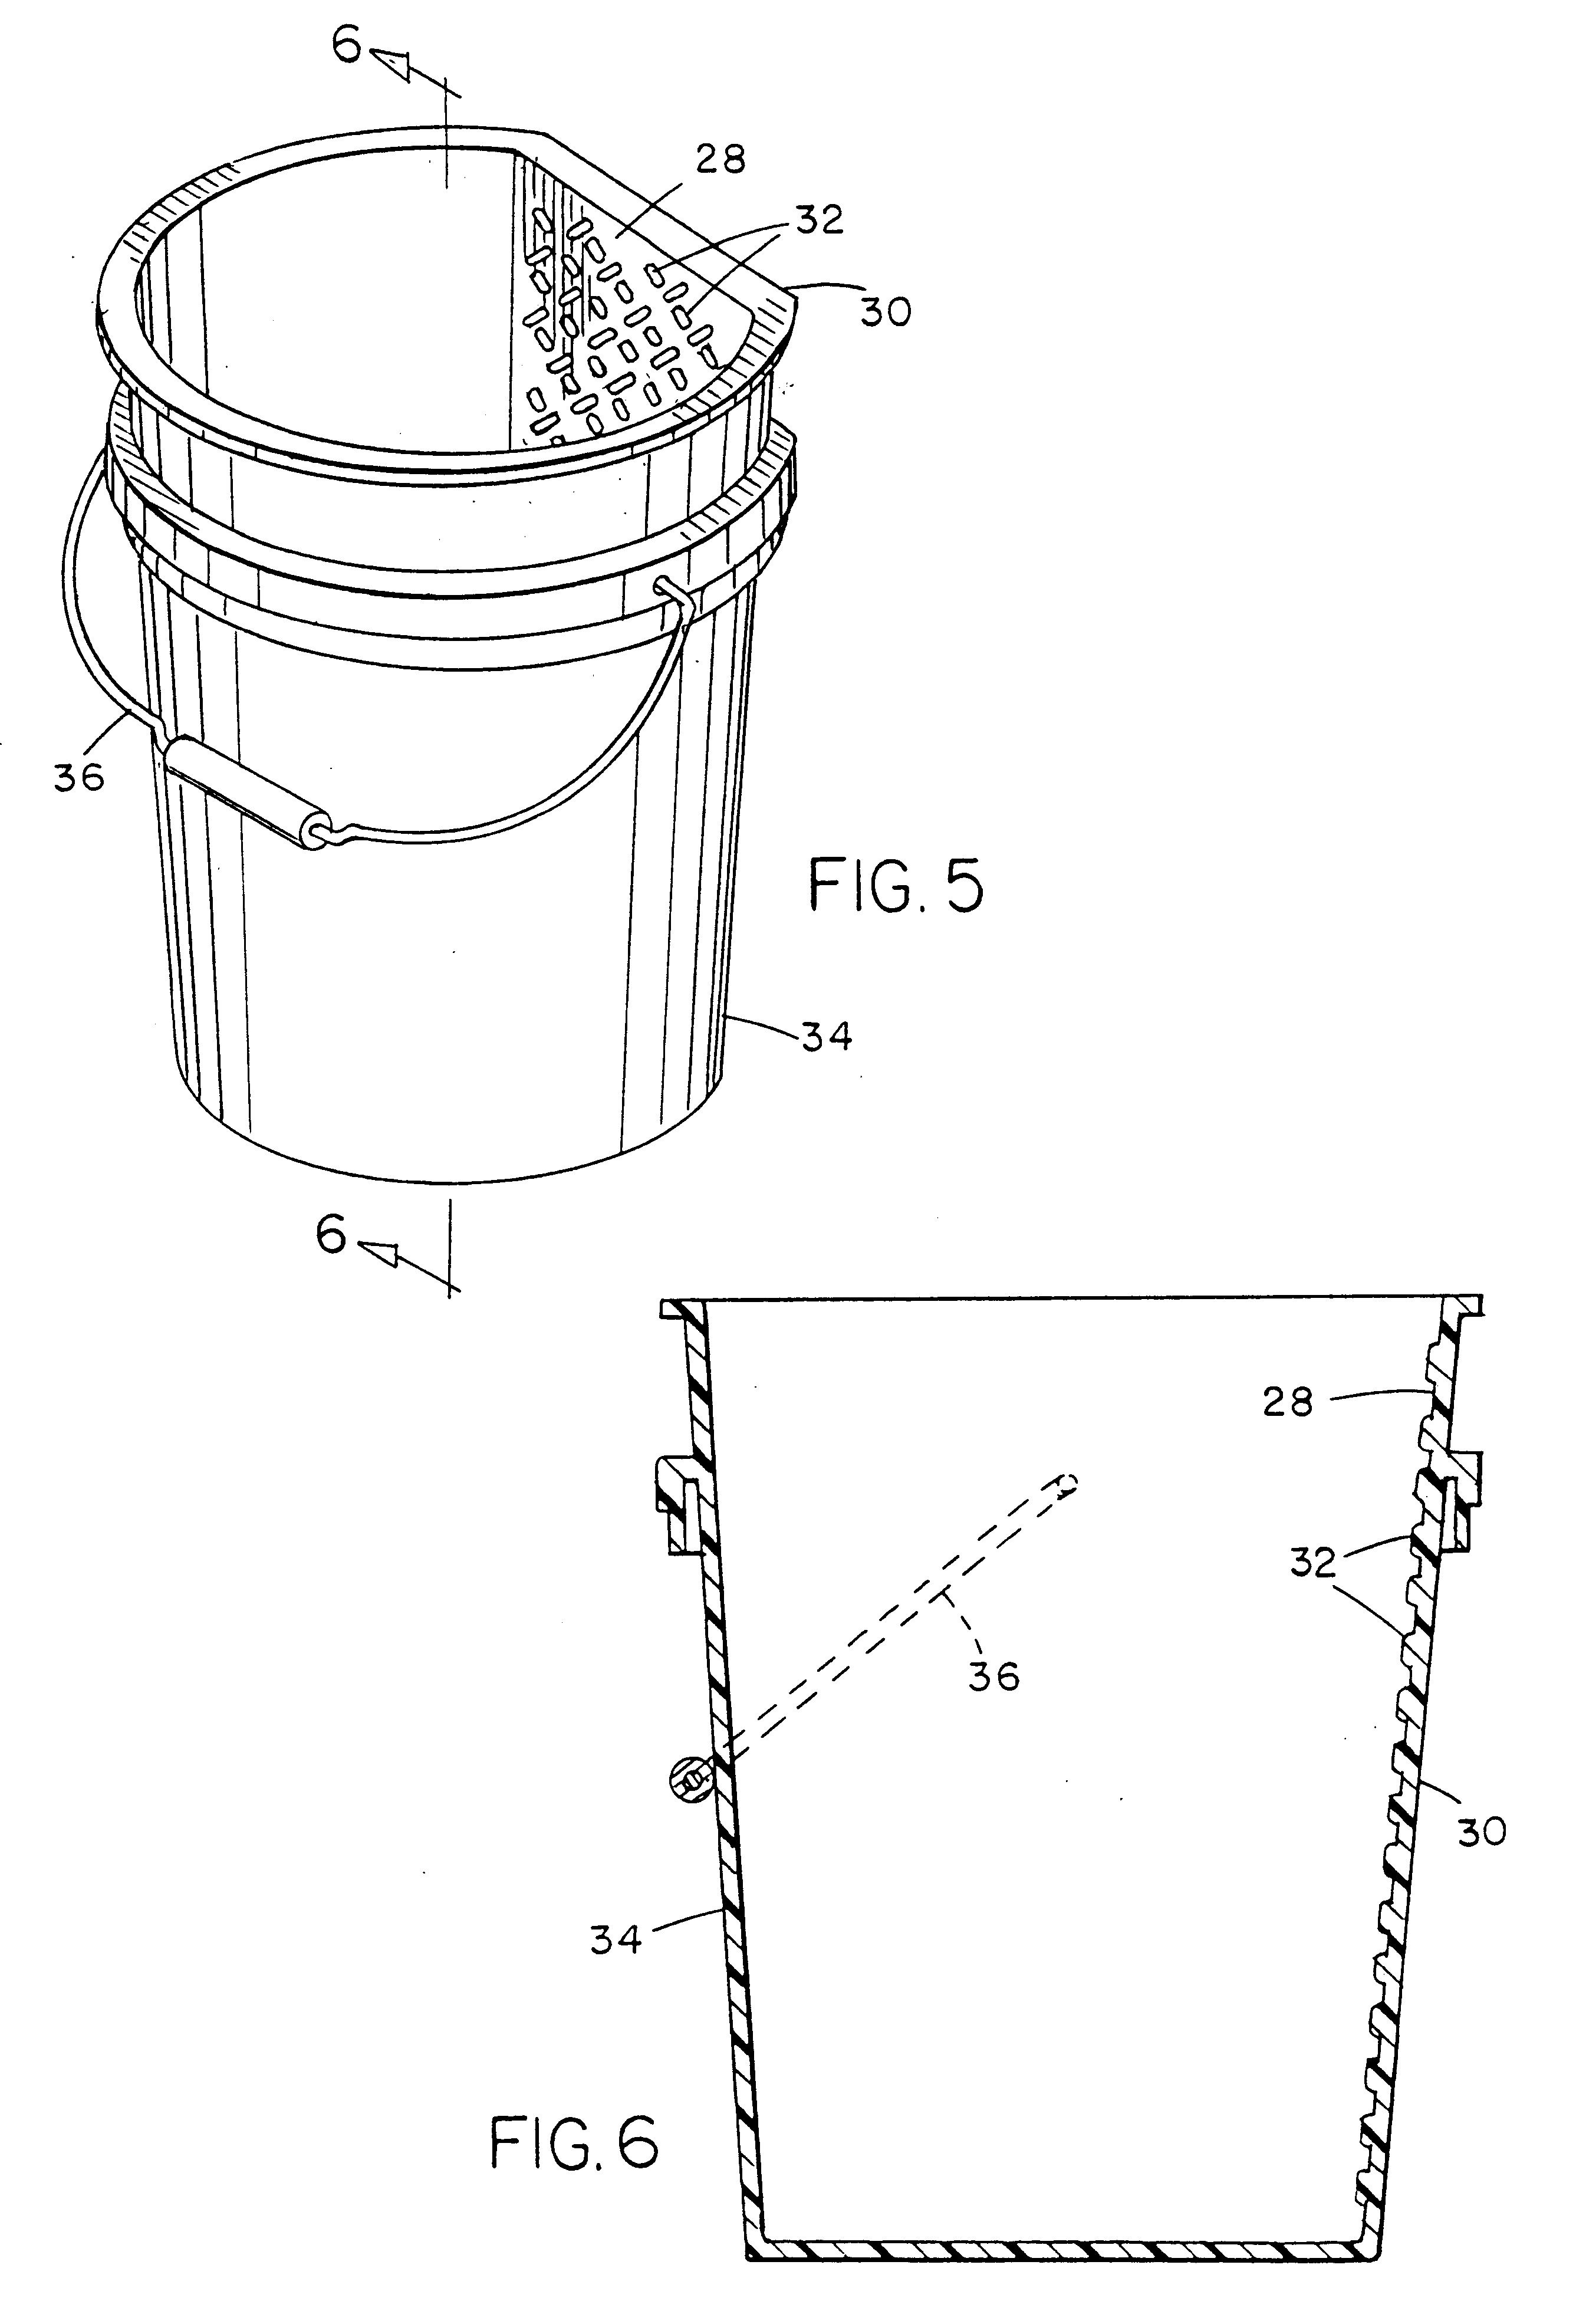 Paint bucket with integral grate